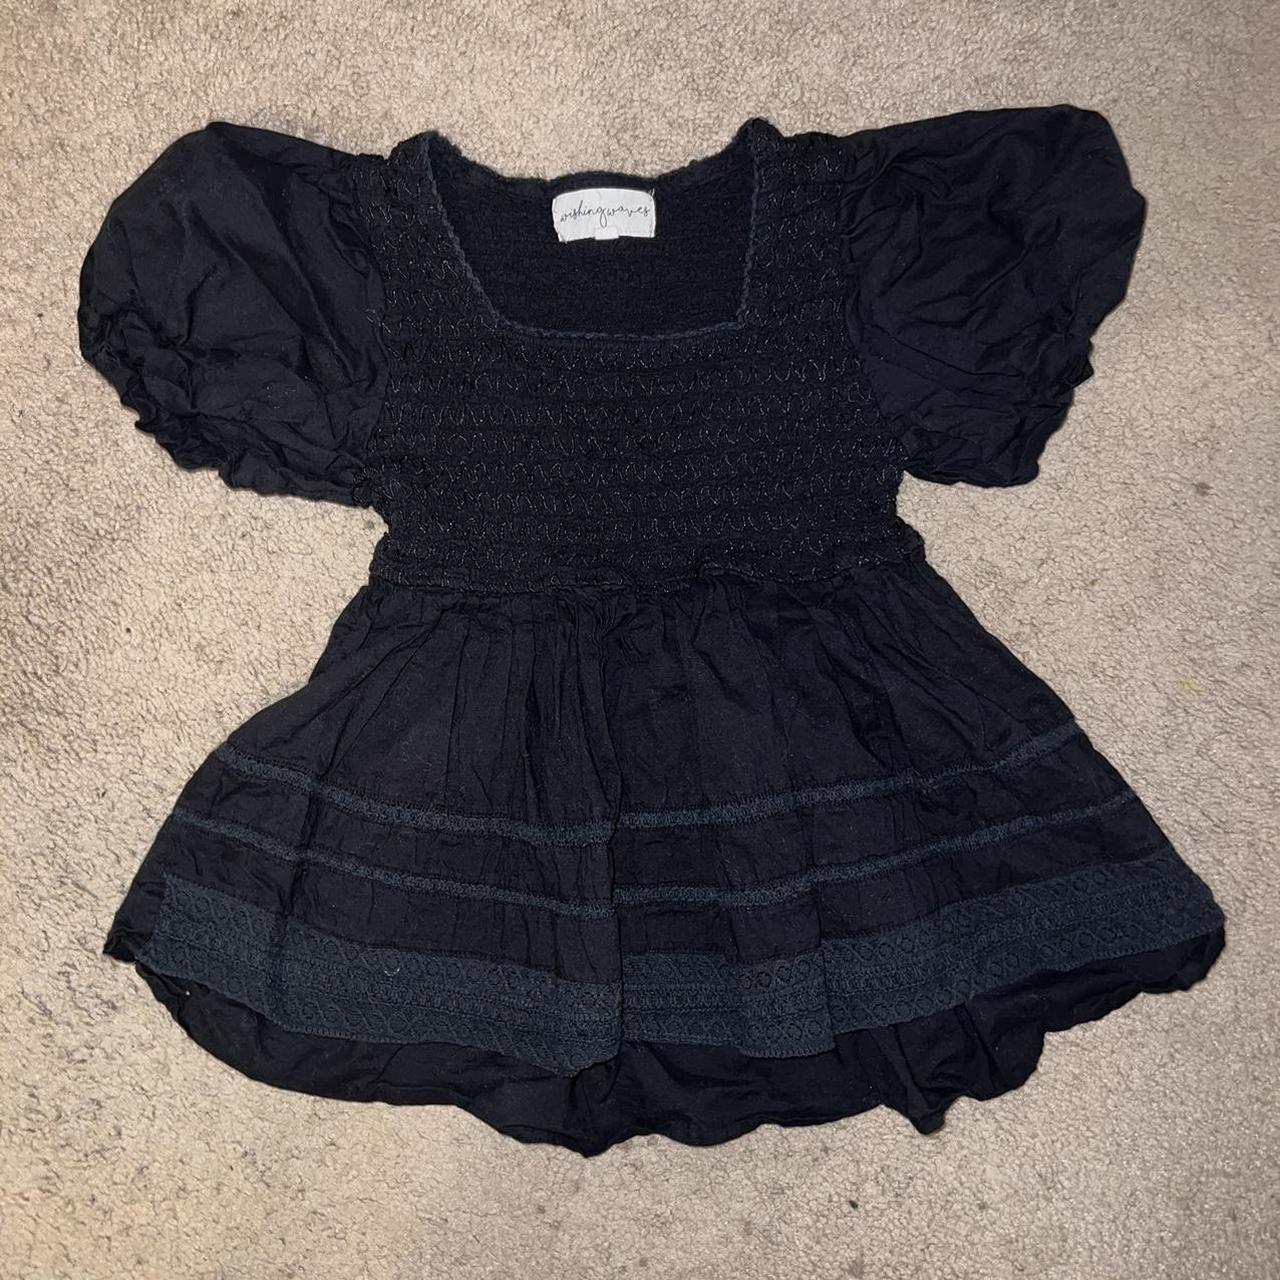 Pretty black blouse with cute puffed sleeves. Could... - Depop